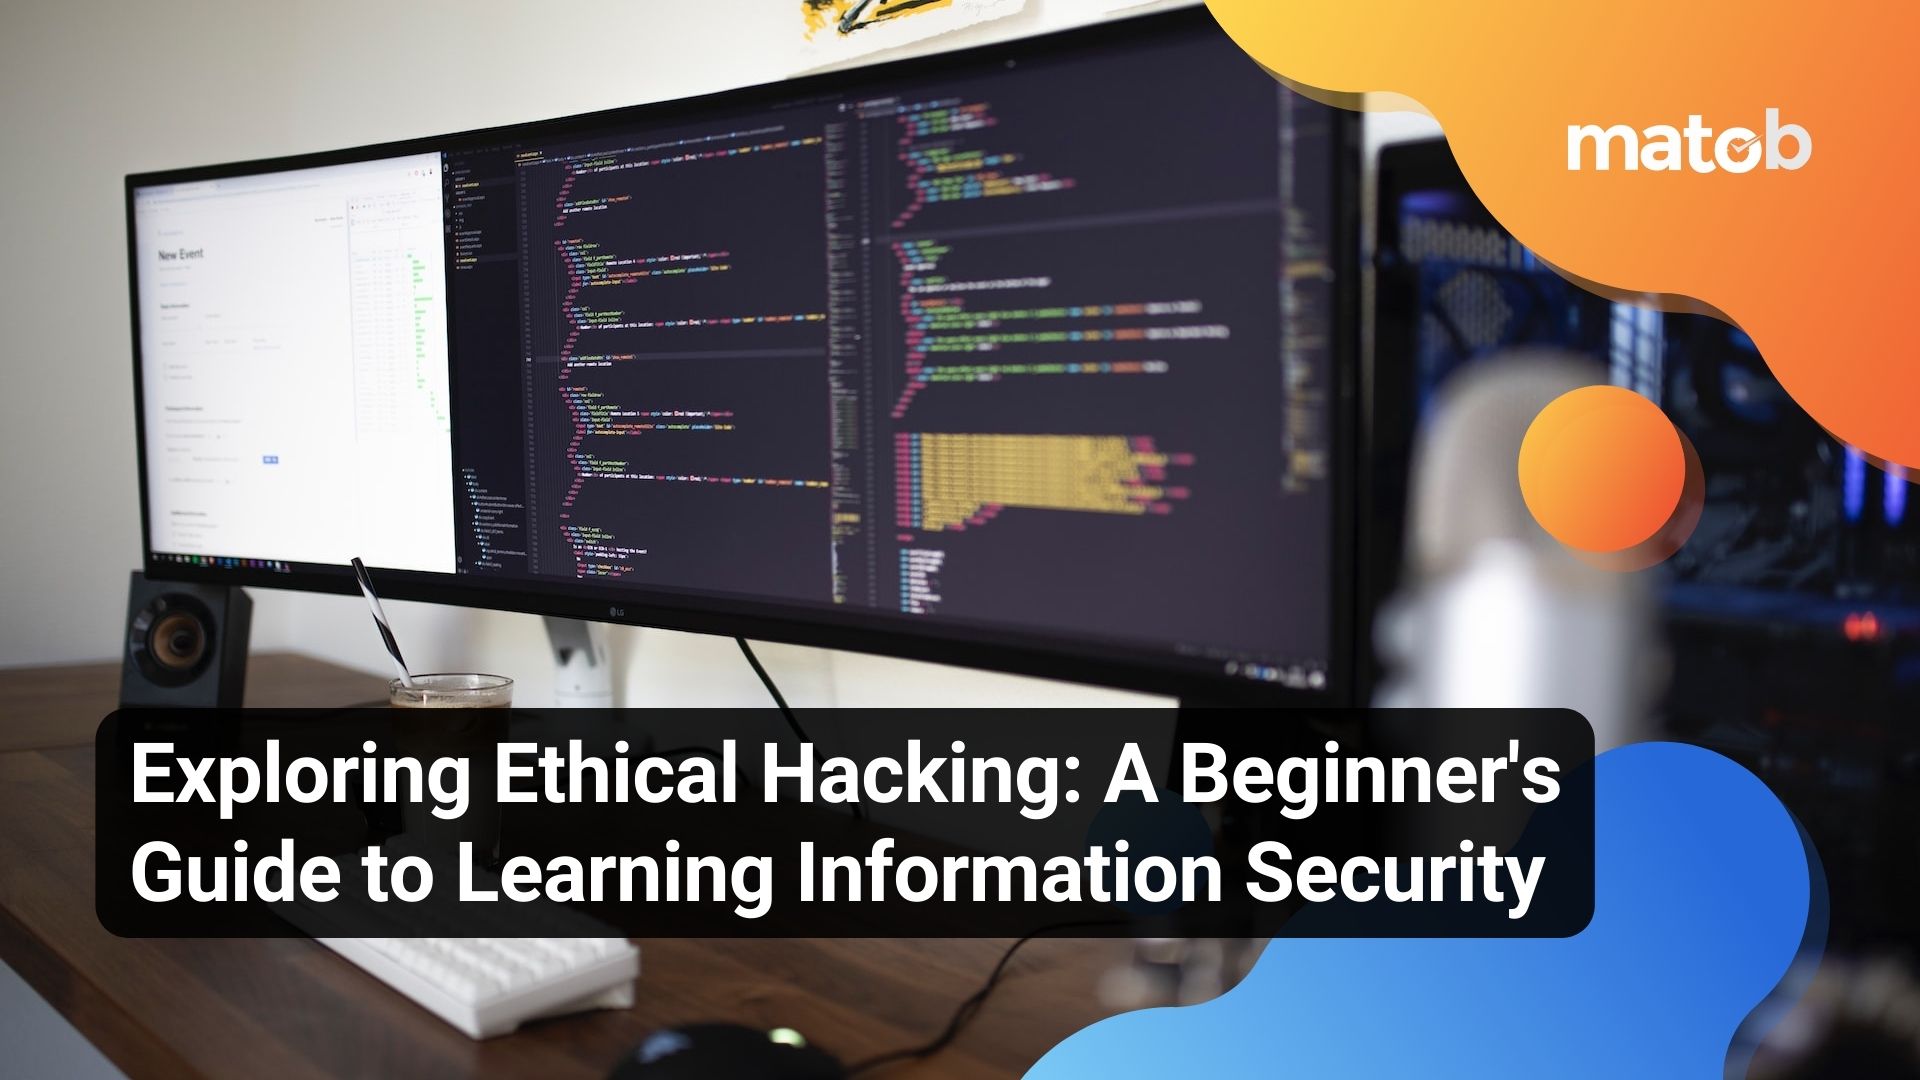 Exploring Ethical Hacking: A Beginner's Guide to Learning Information Security